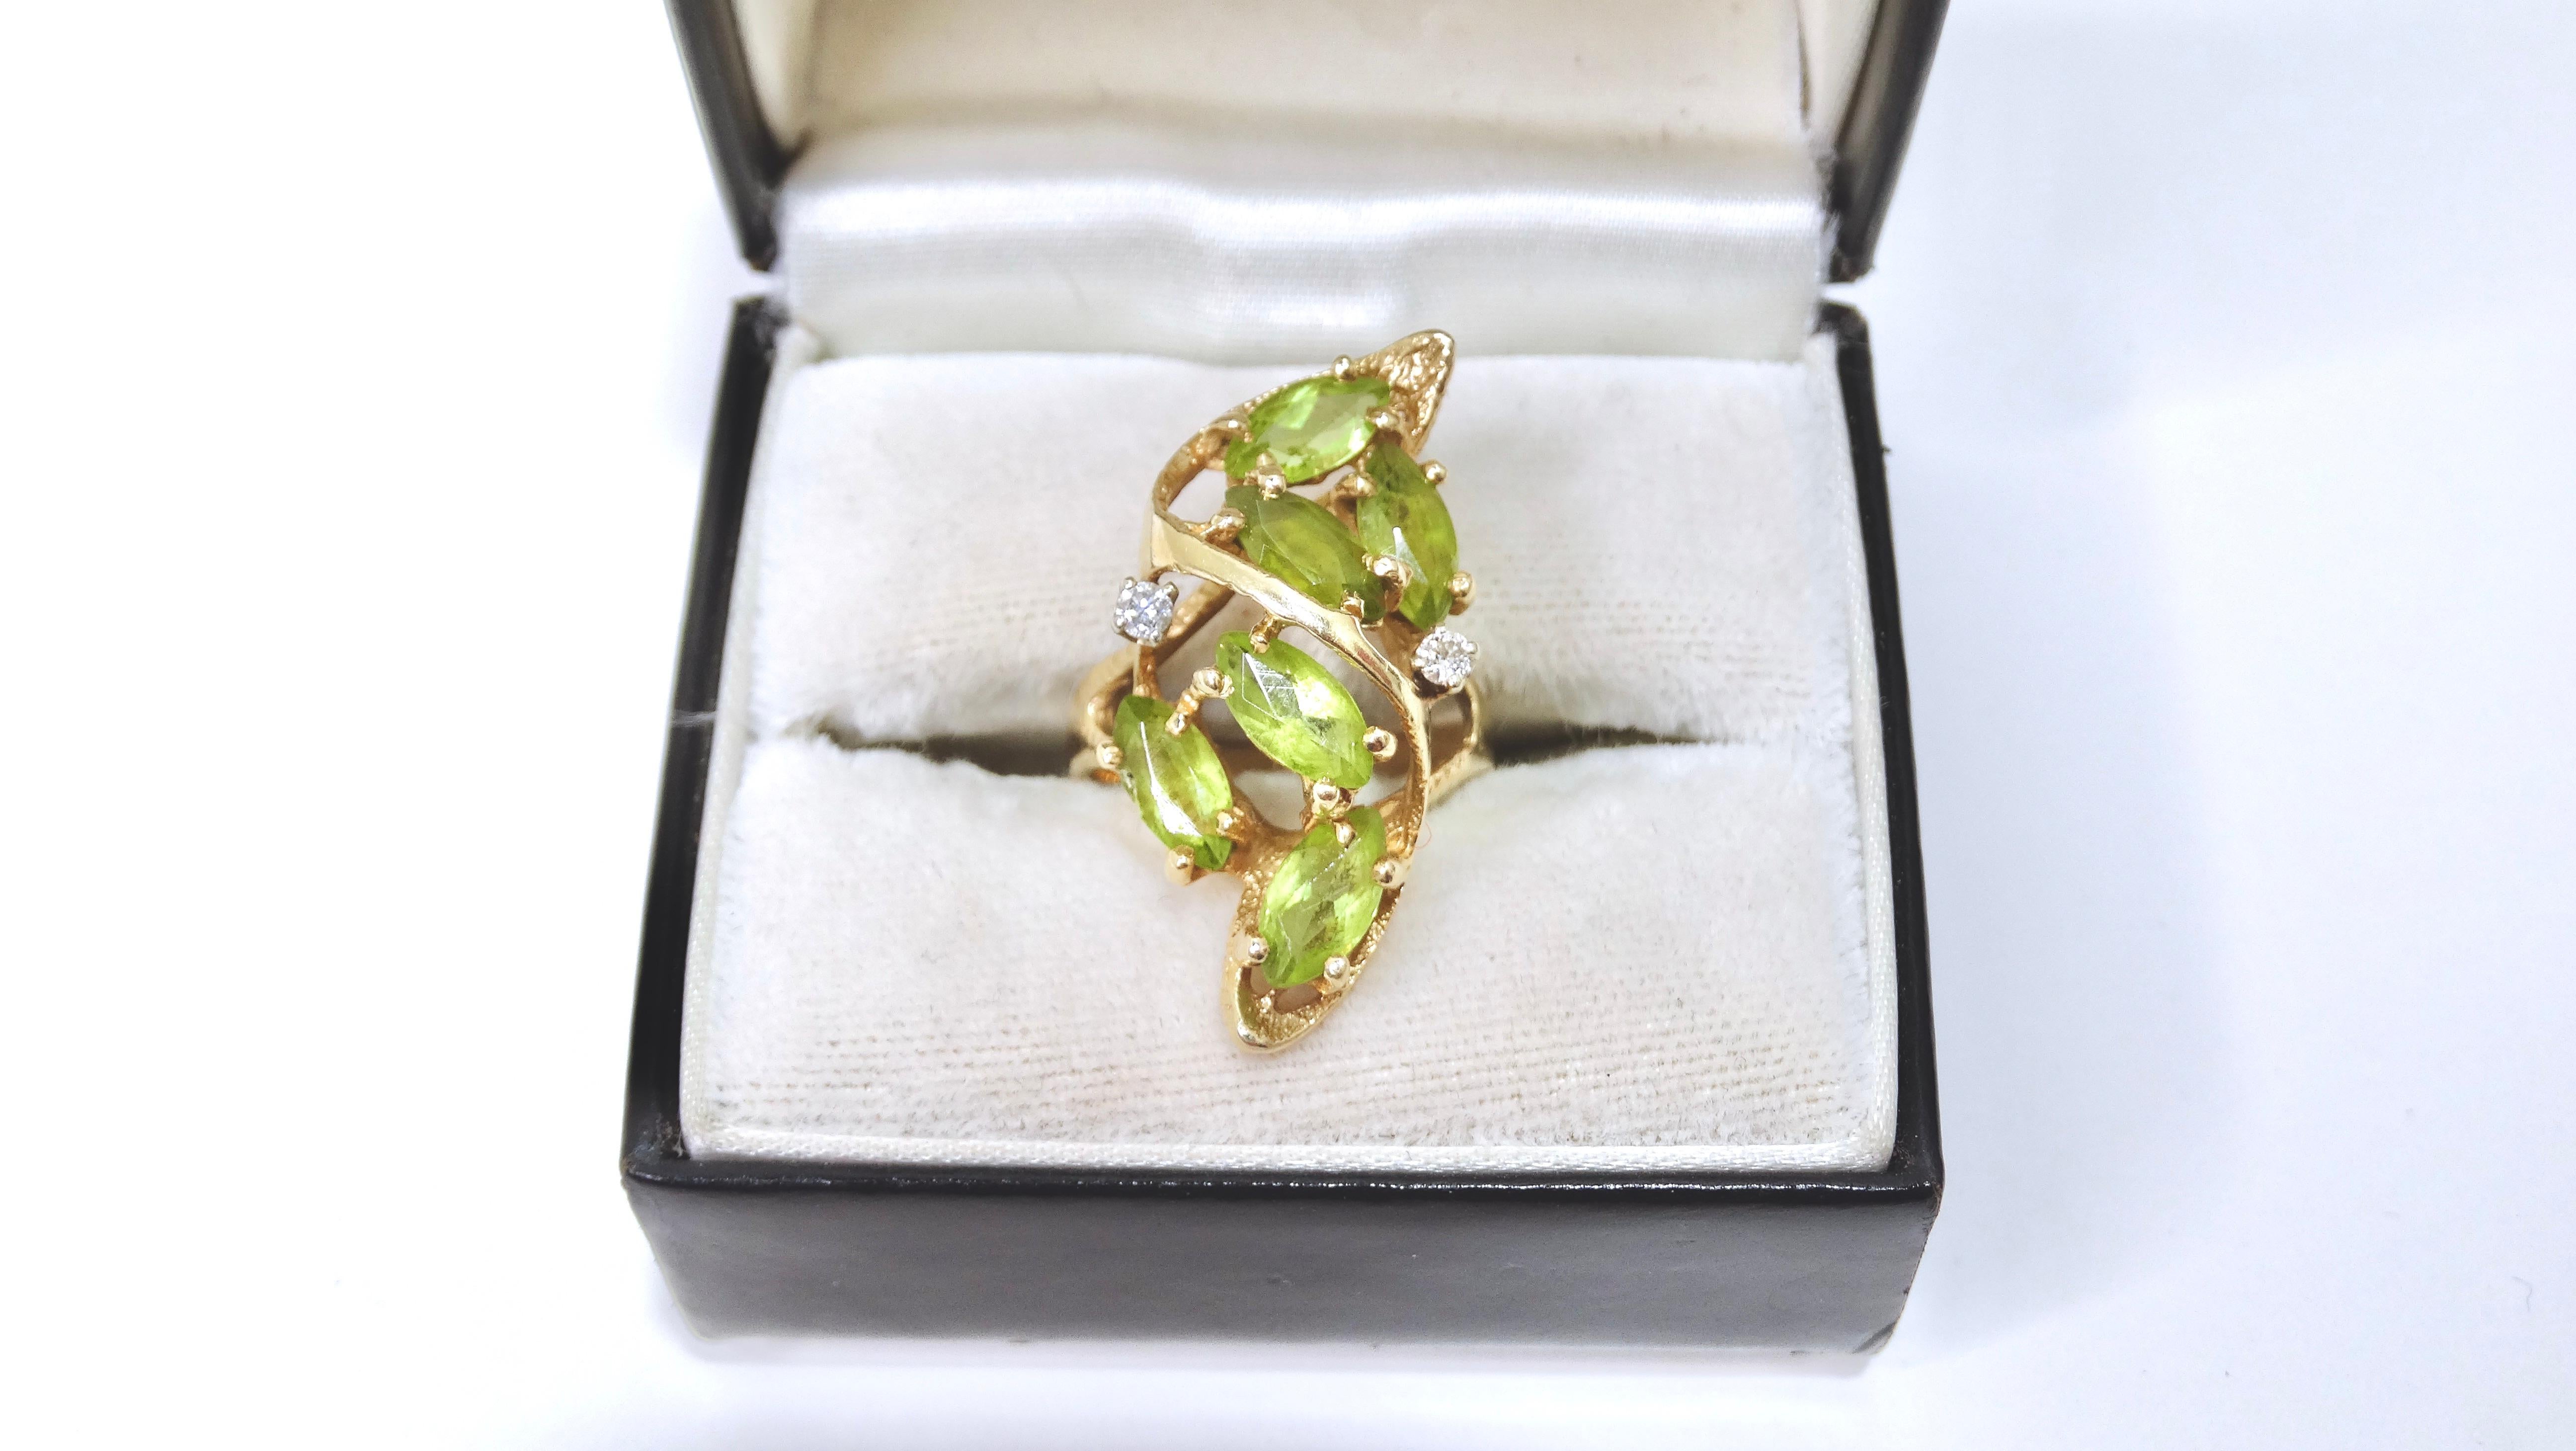 A beautiful piece to add to your ring collection! This is a large cocktail ring that has a radiant collection of stones. It includes six tourmaline stones accompanied by two diamonds. This ring will add a pop of color to bring any outfit to life.